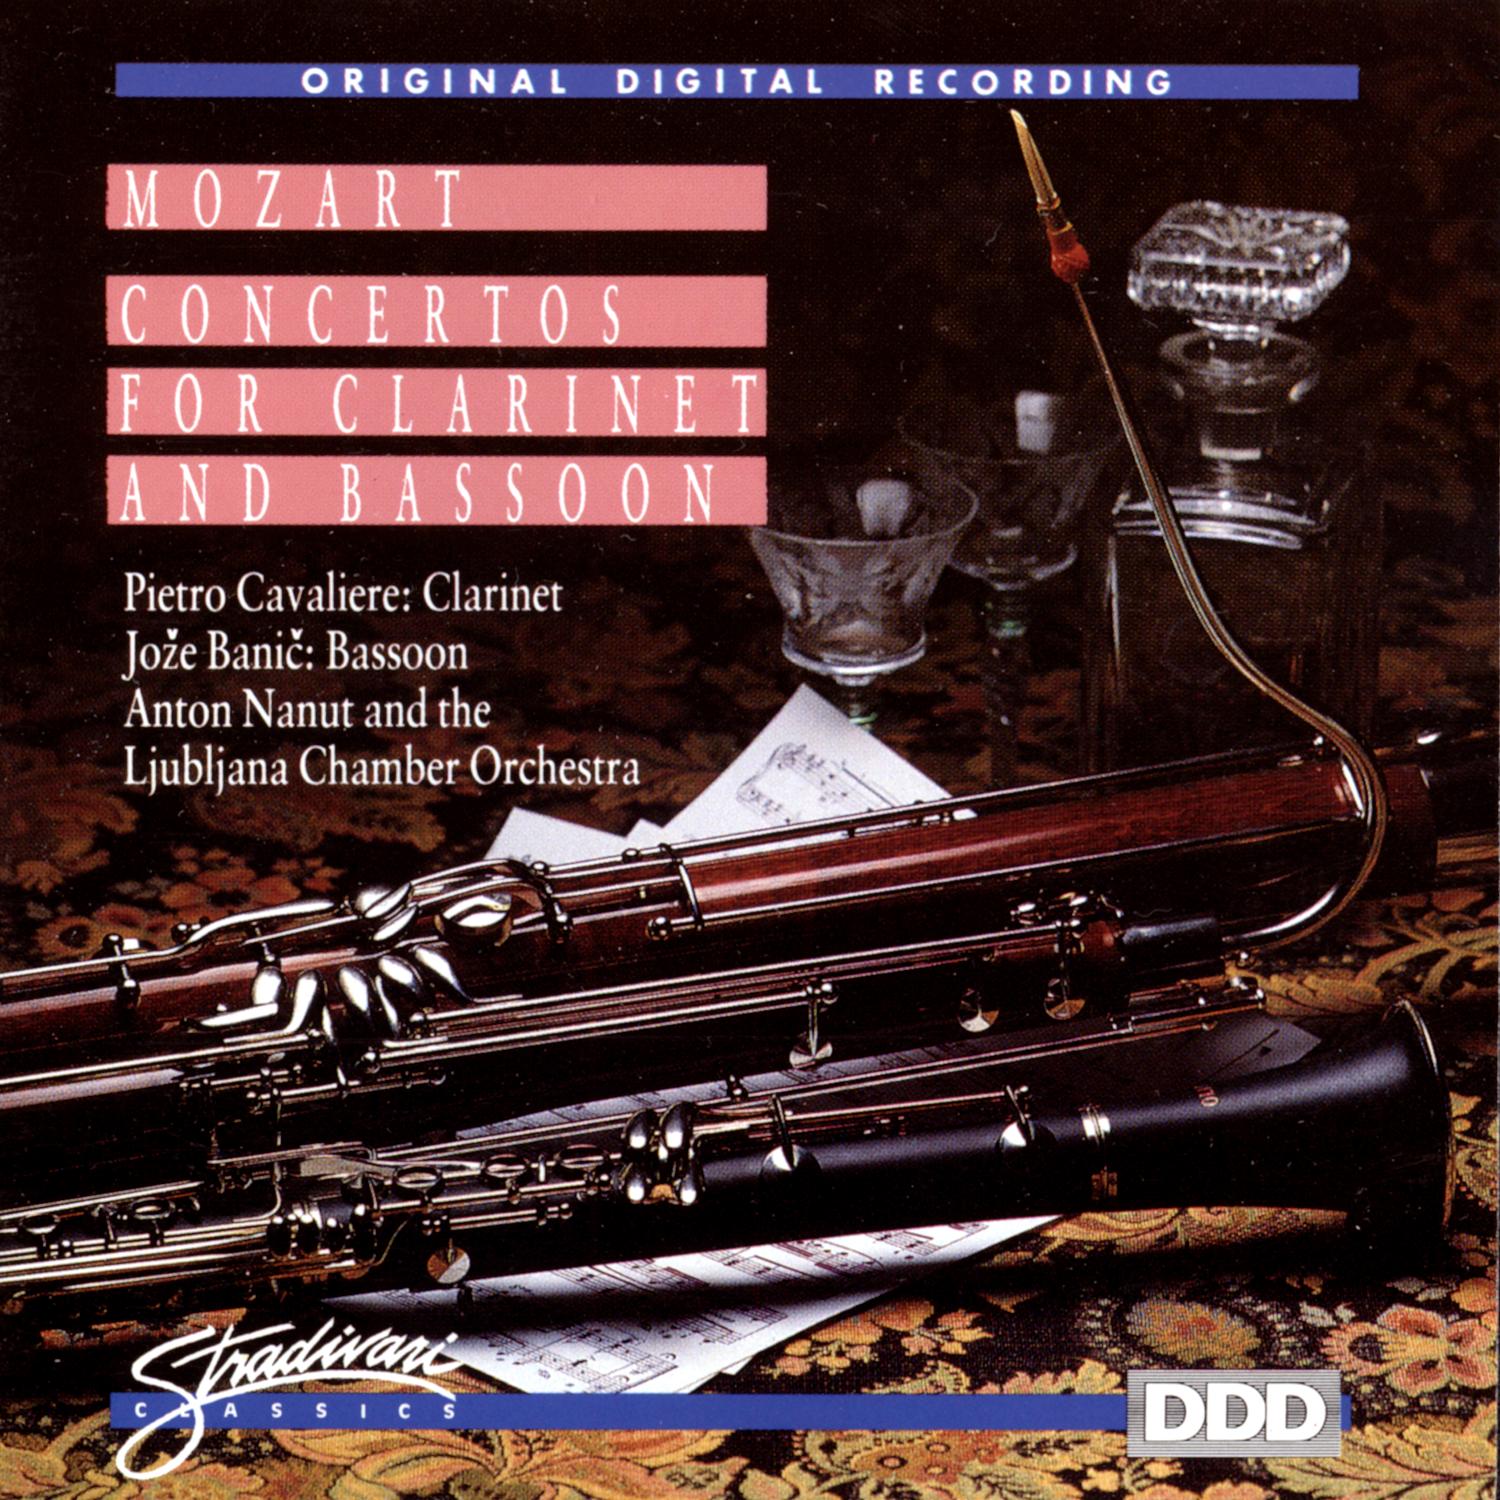 Concerto For Bassoon And Orchestra In B Flat Major, K 191 -Andante Ma Adagio